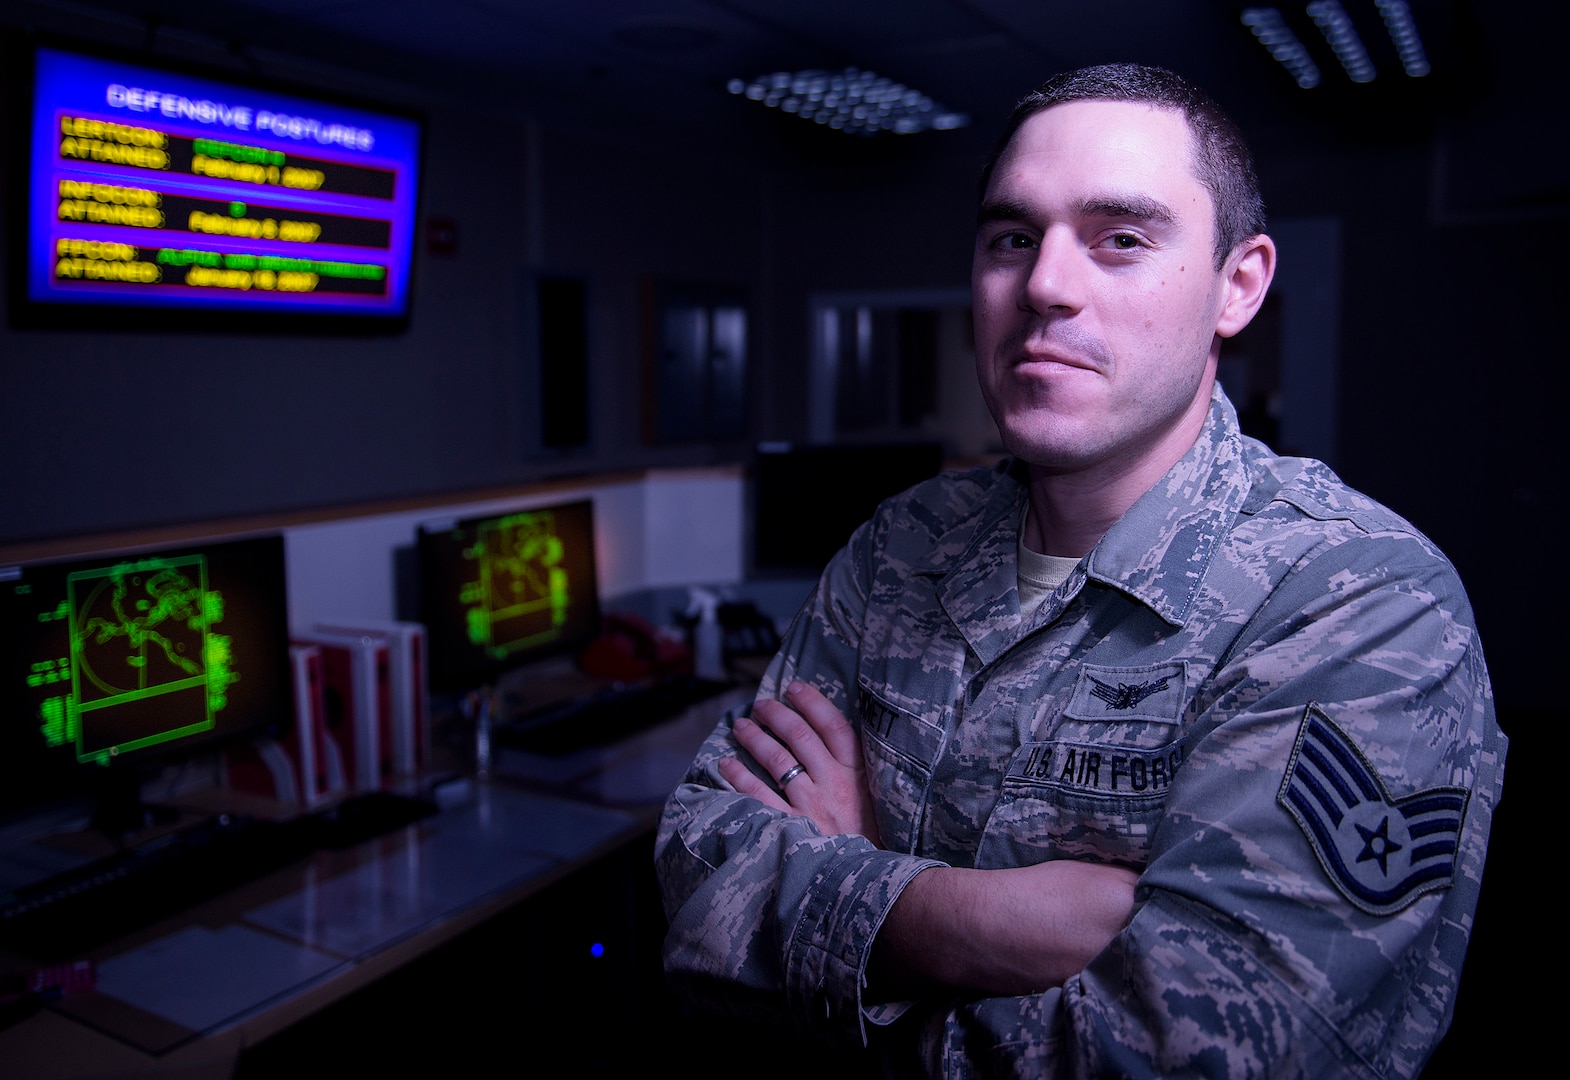 Staff Sgt. Kennett stands in front of displays in the Solid State Phased Array Radar System at Clear Air Force Station, Alaska.